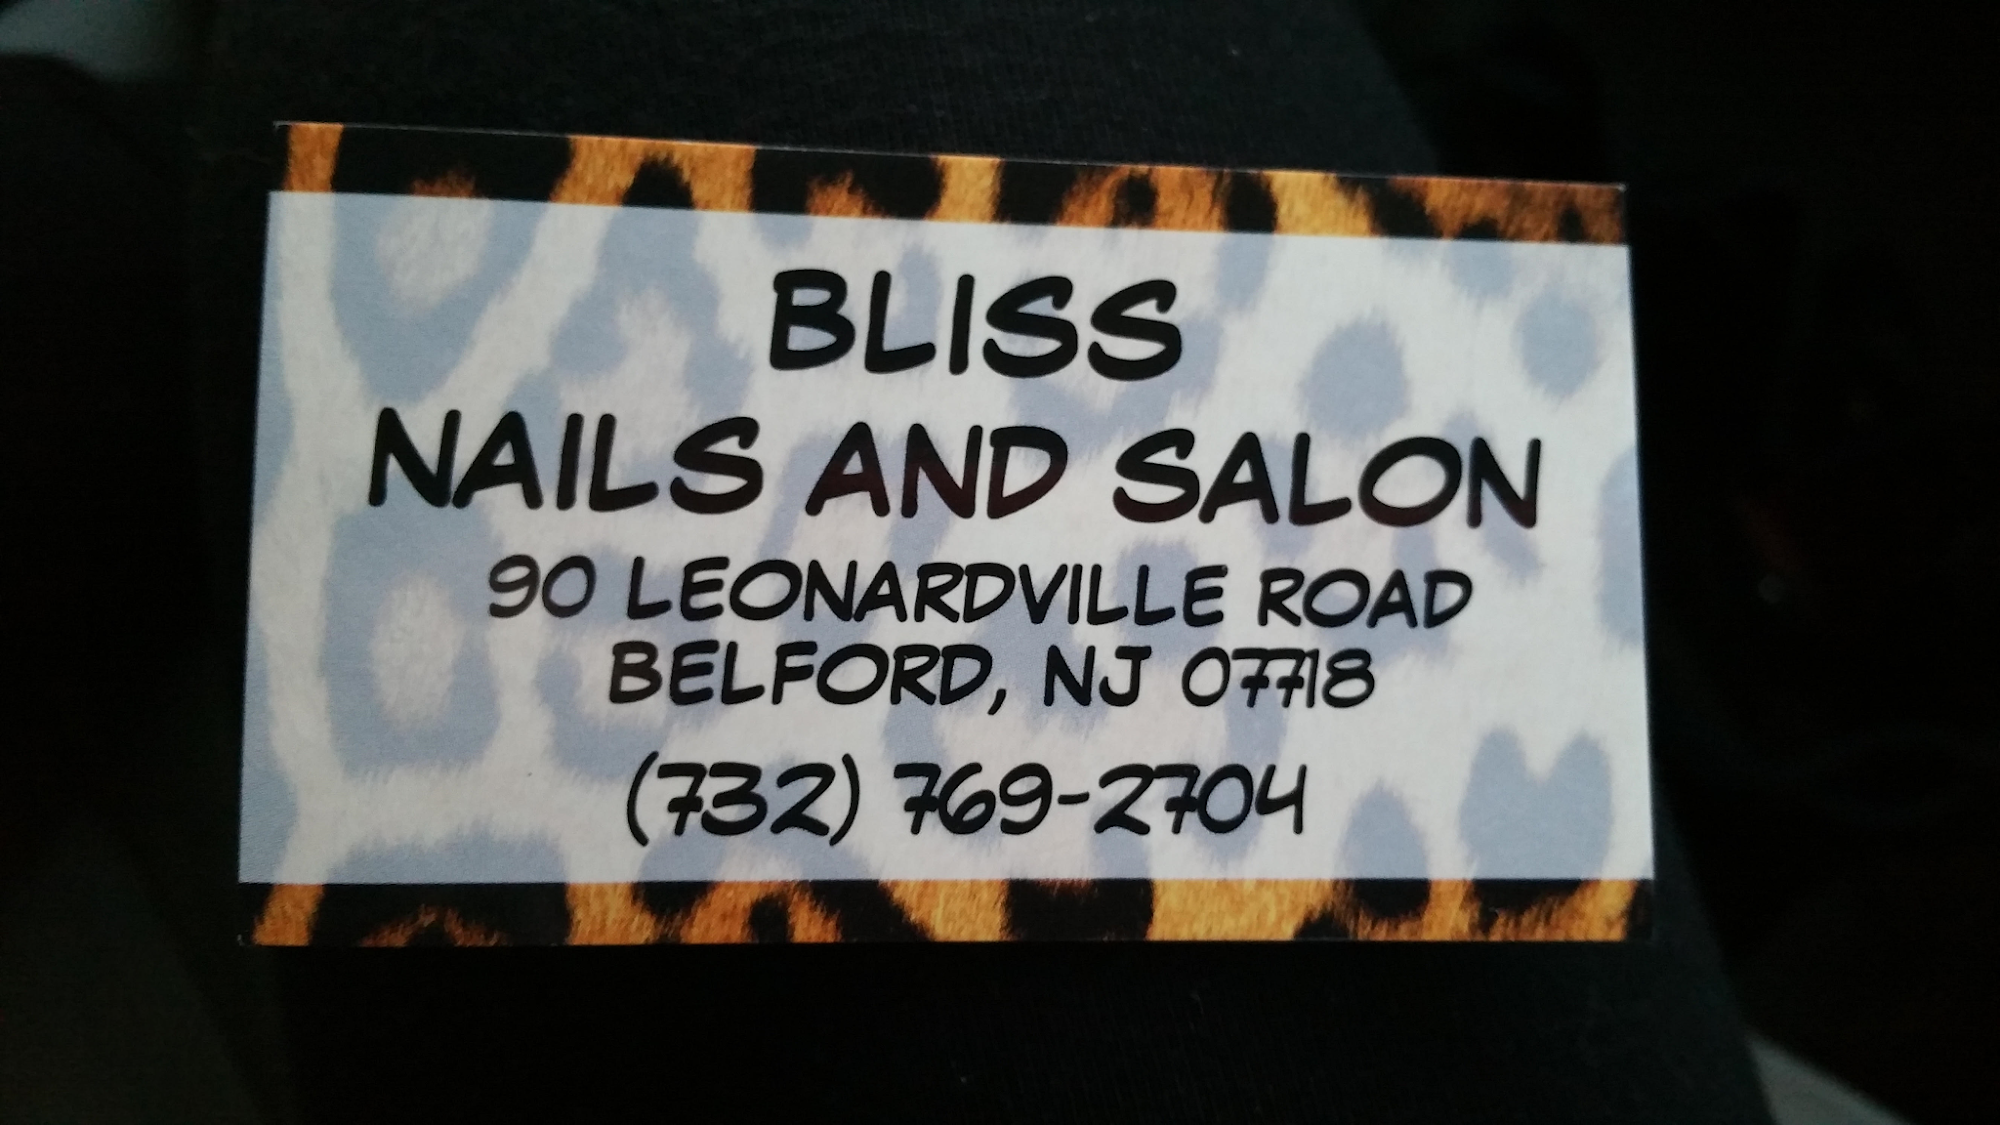 BLISS NAILS AND SALON